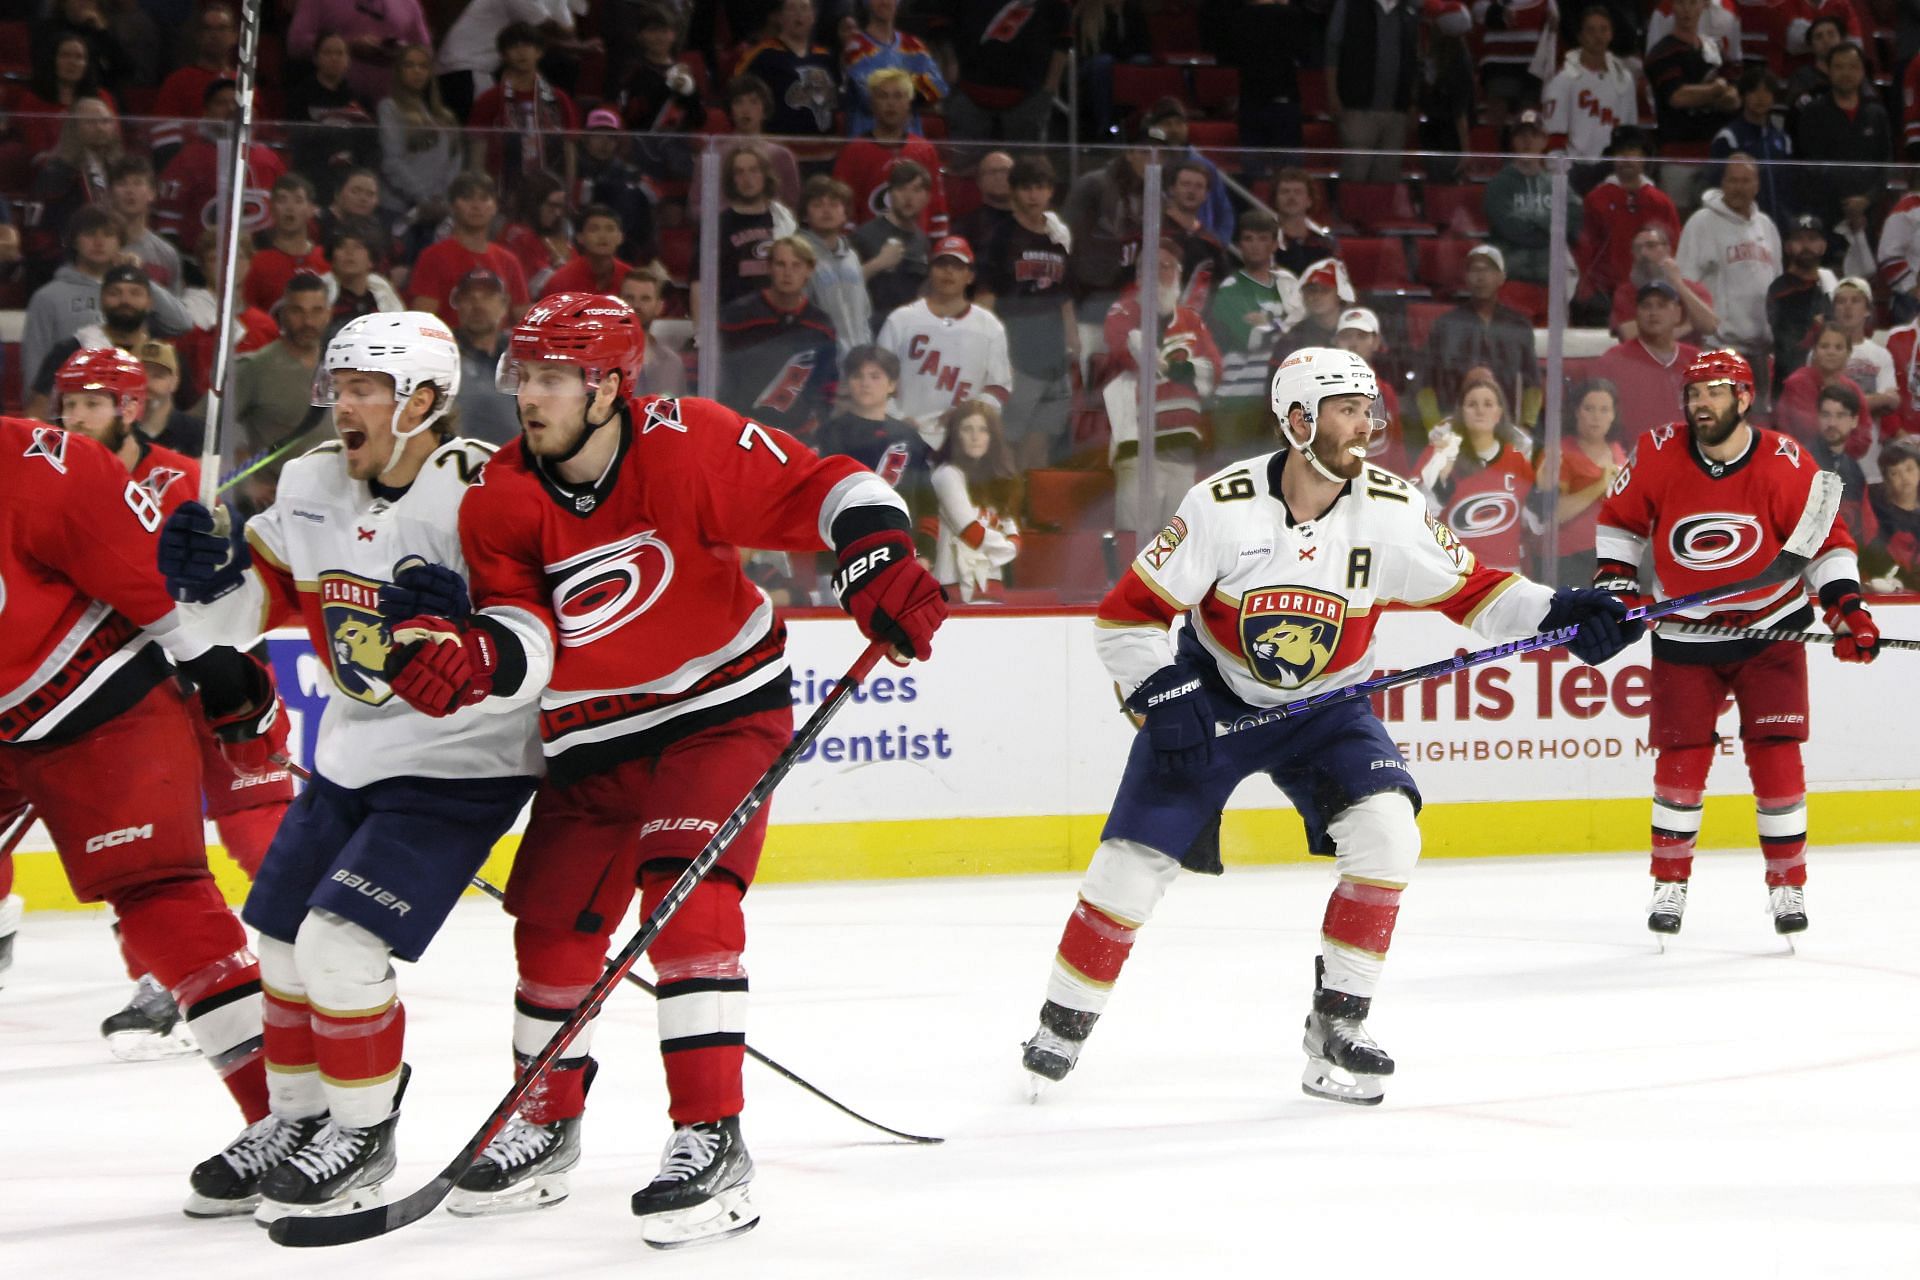 Carolina Hurricanes Carolina Hurricanes vs Florida Panthers Game 2 How to watch, TV channel list, live stream details and more